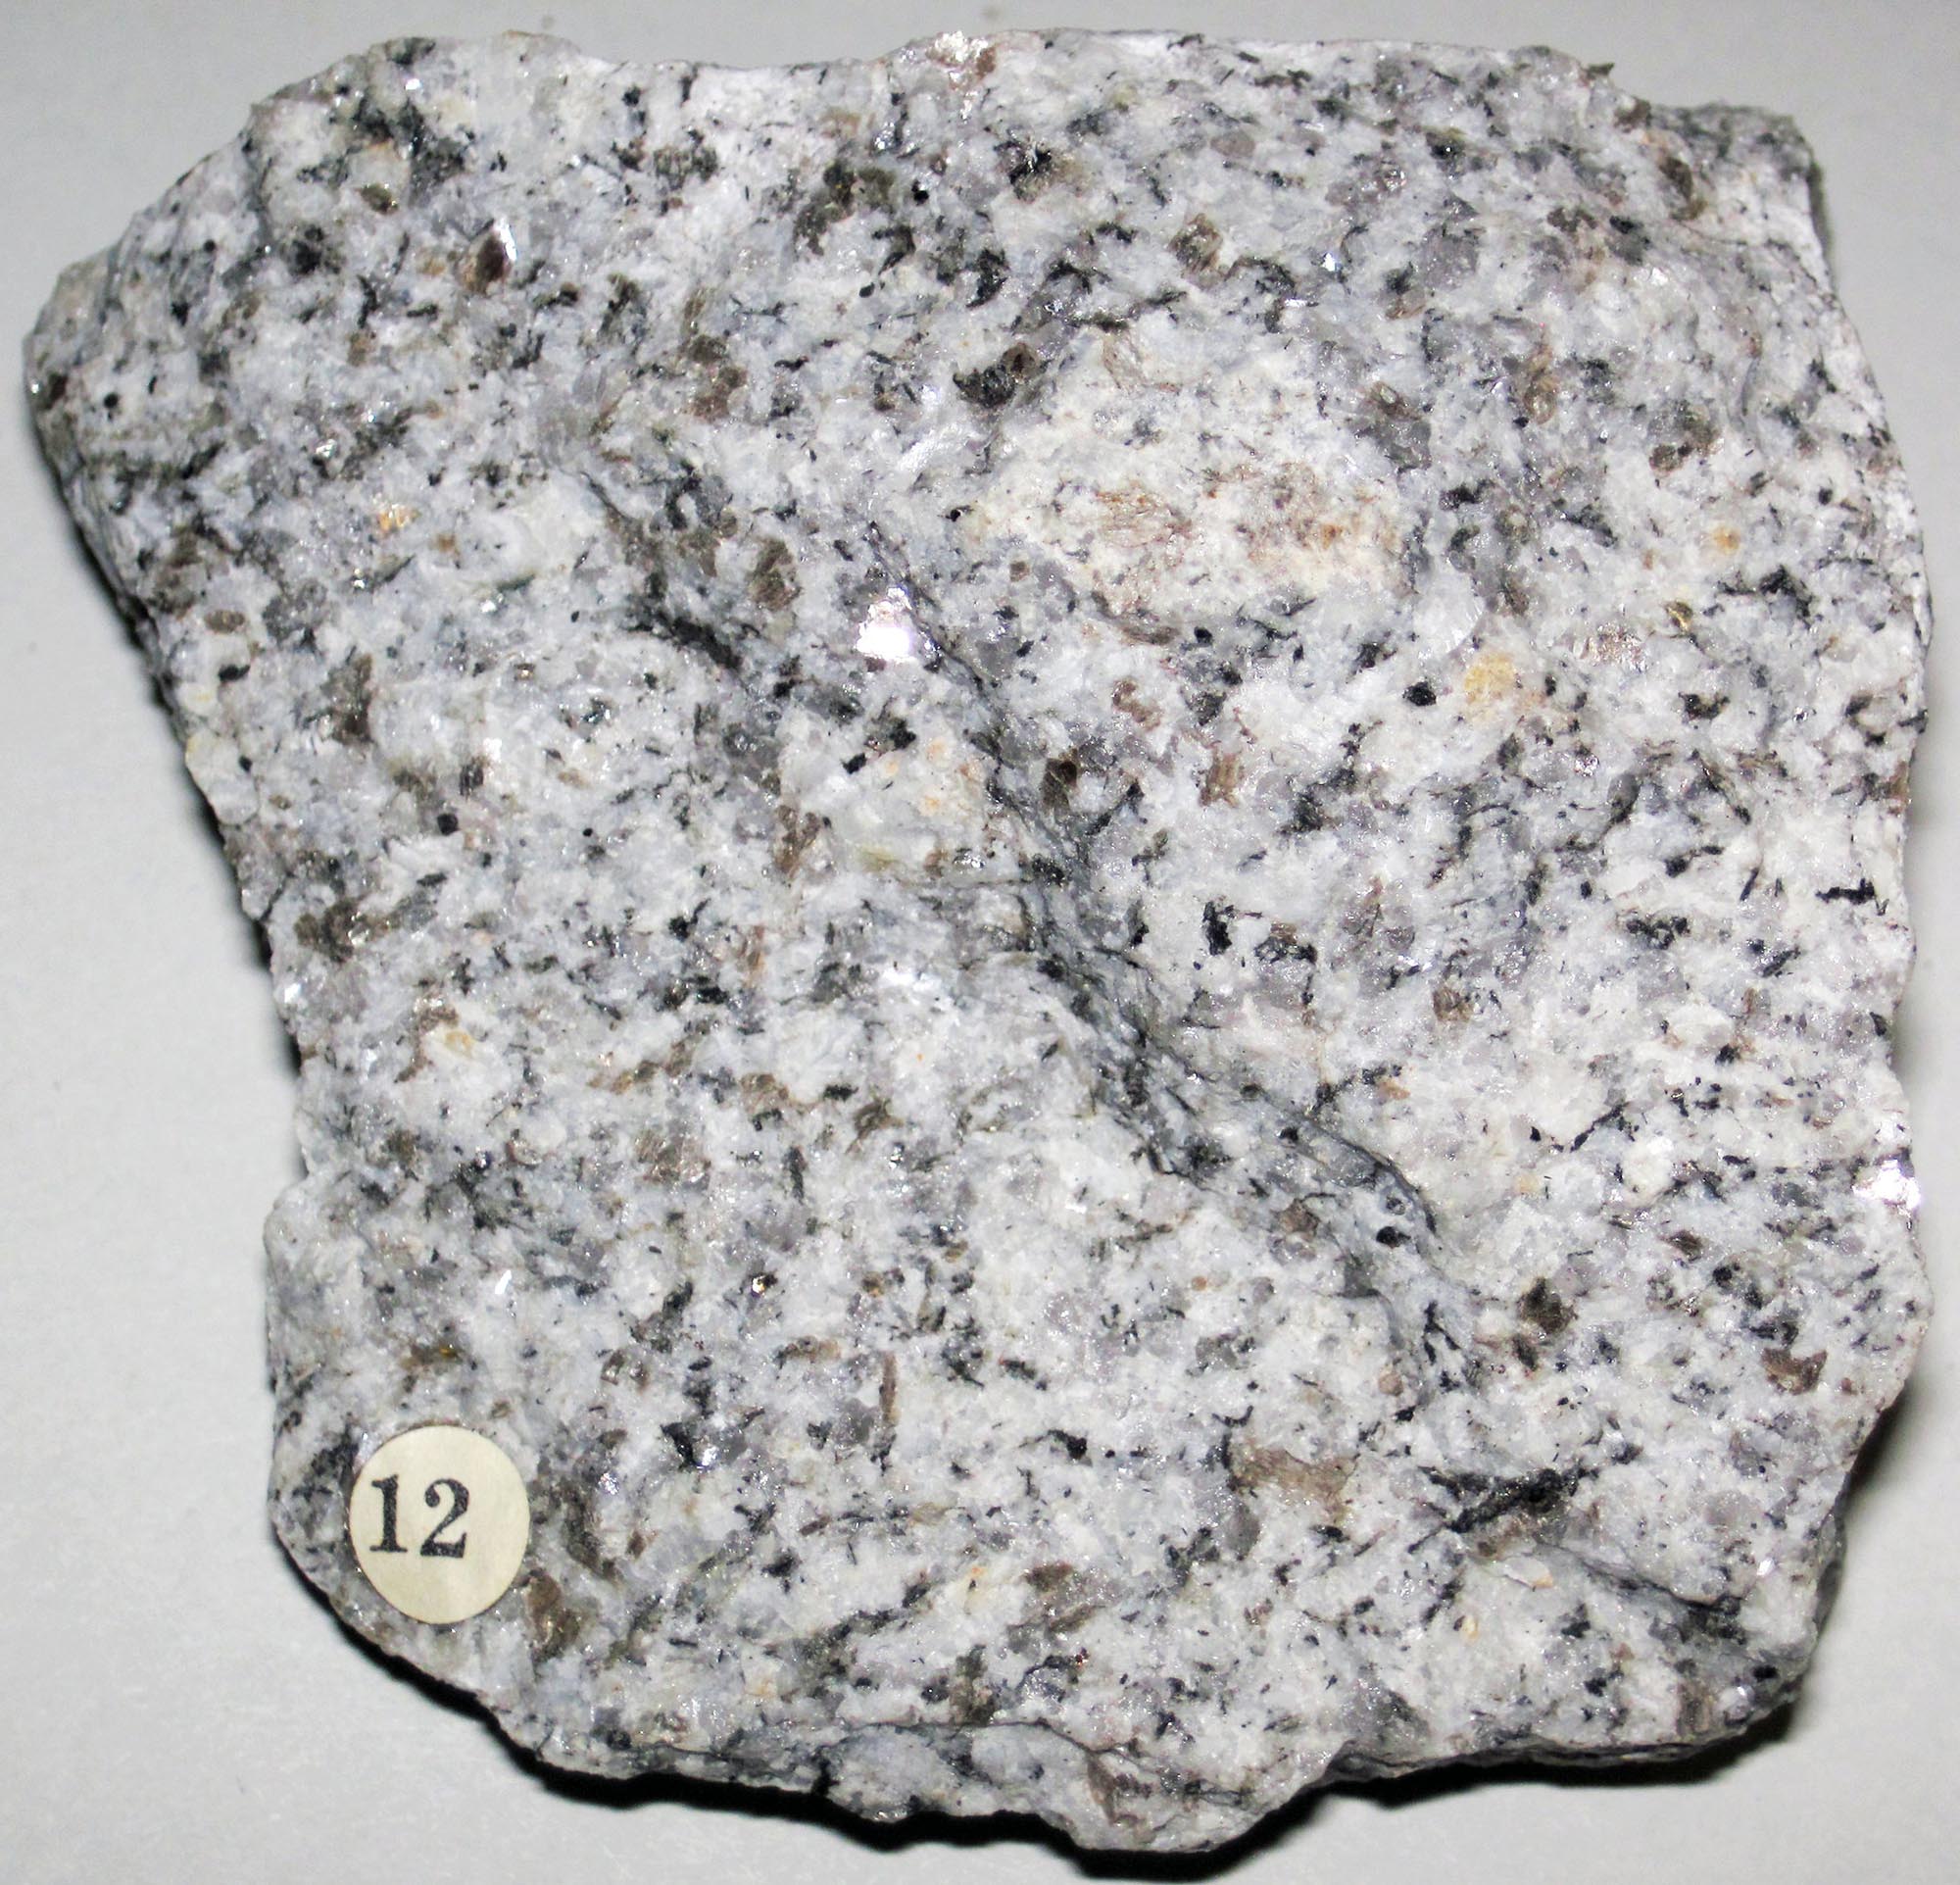 Photo of granite rock from New Hampshire.